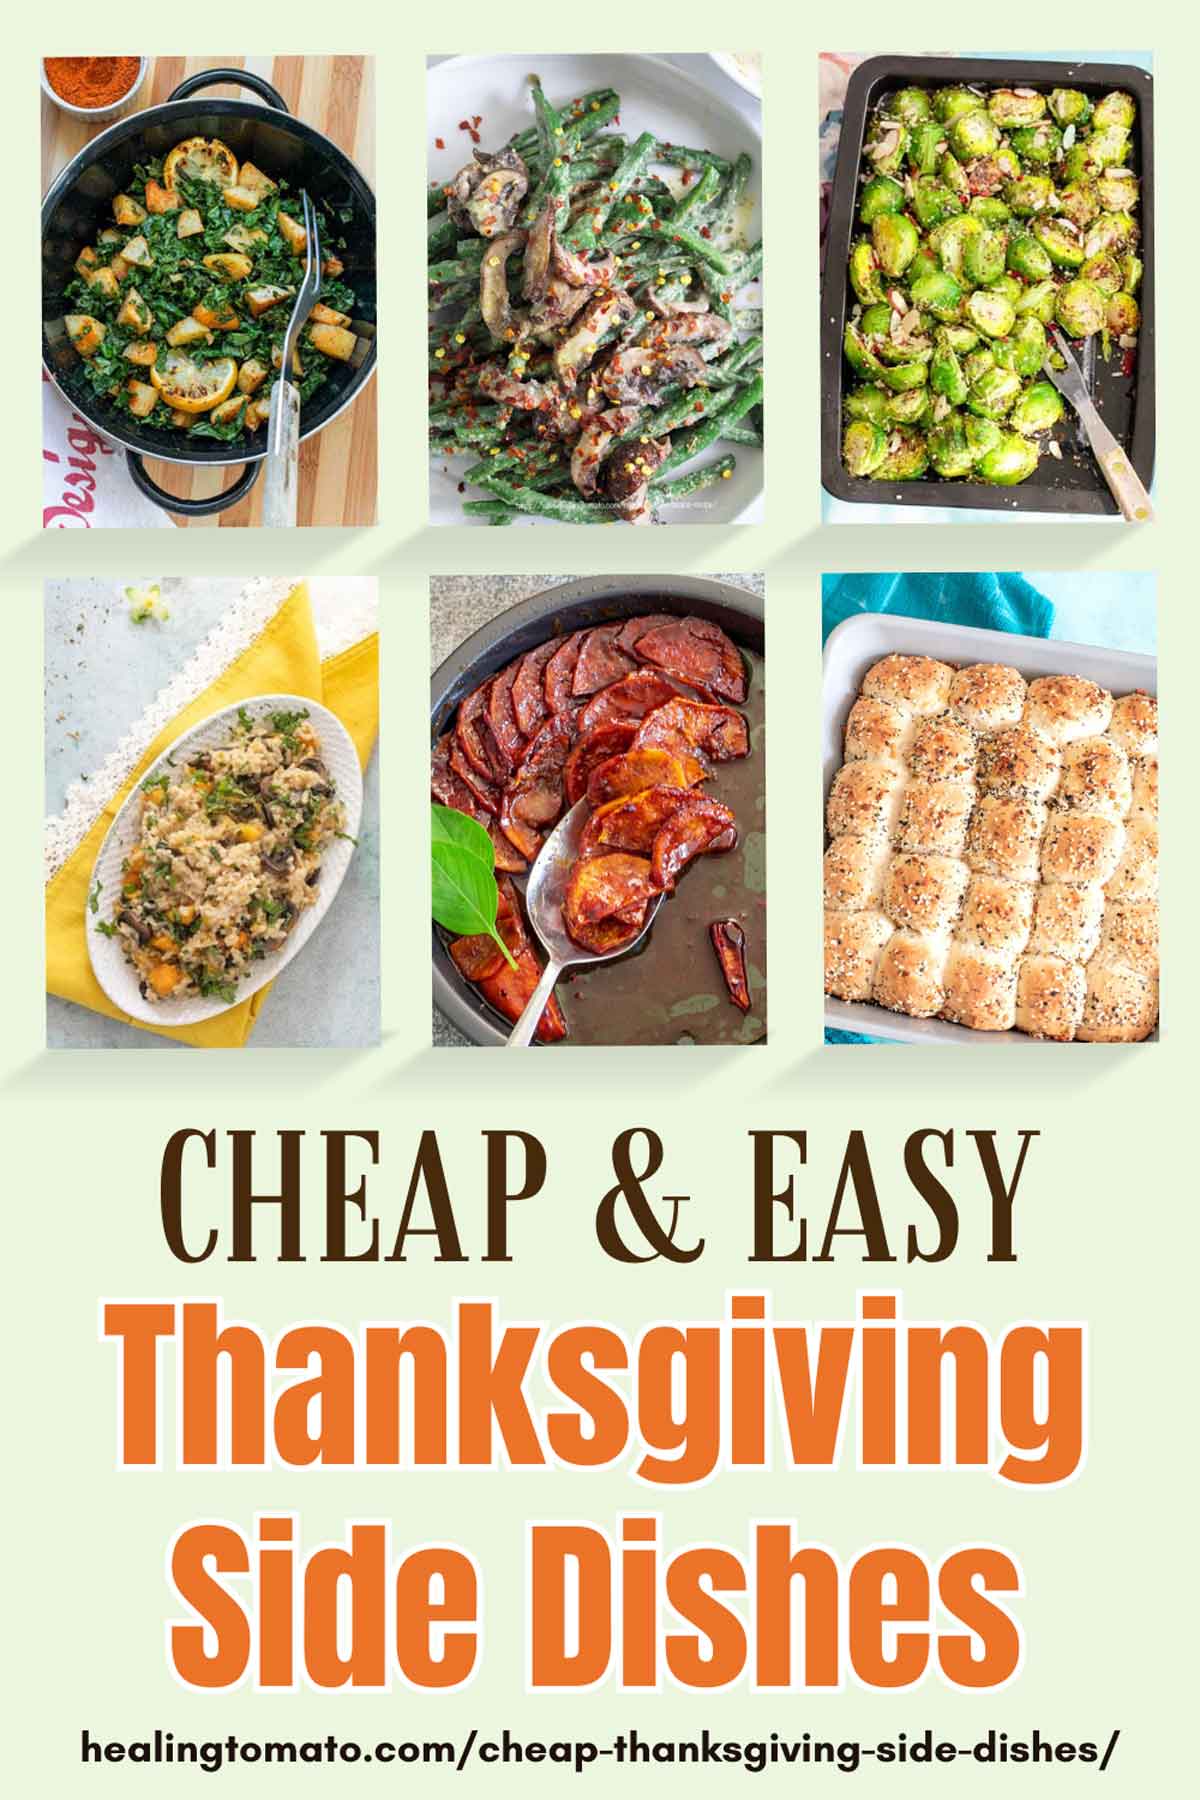 Collage of 6 images with the title of "Cheap & Easy Thanksgiving side dishes" written below the images.